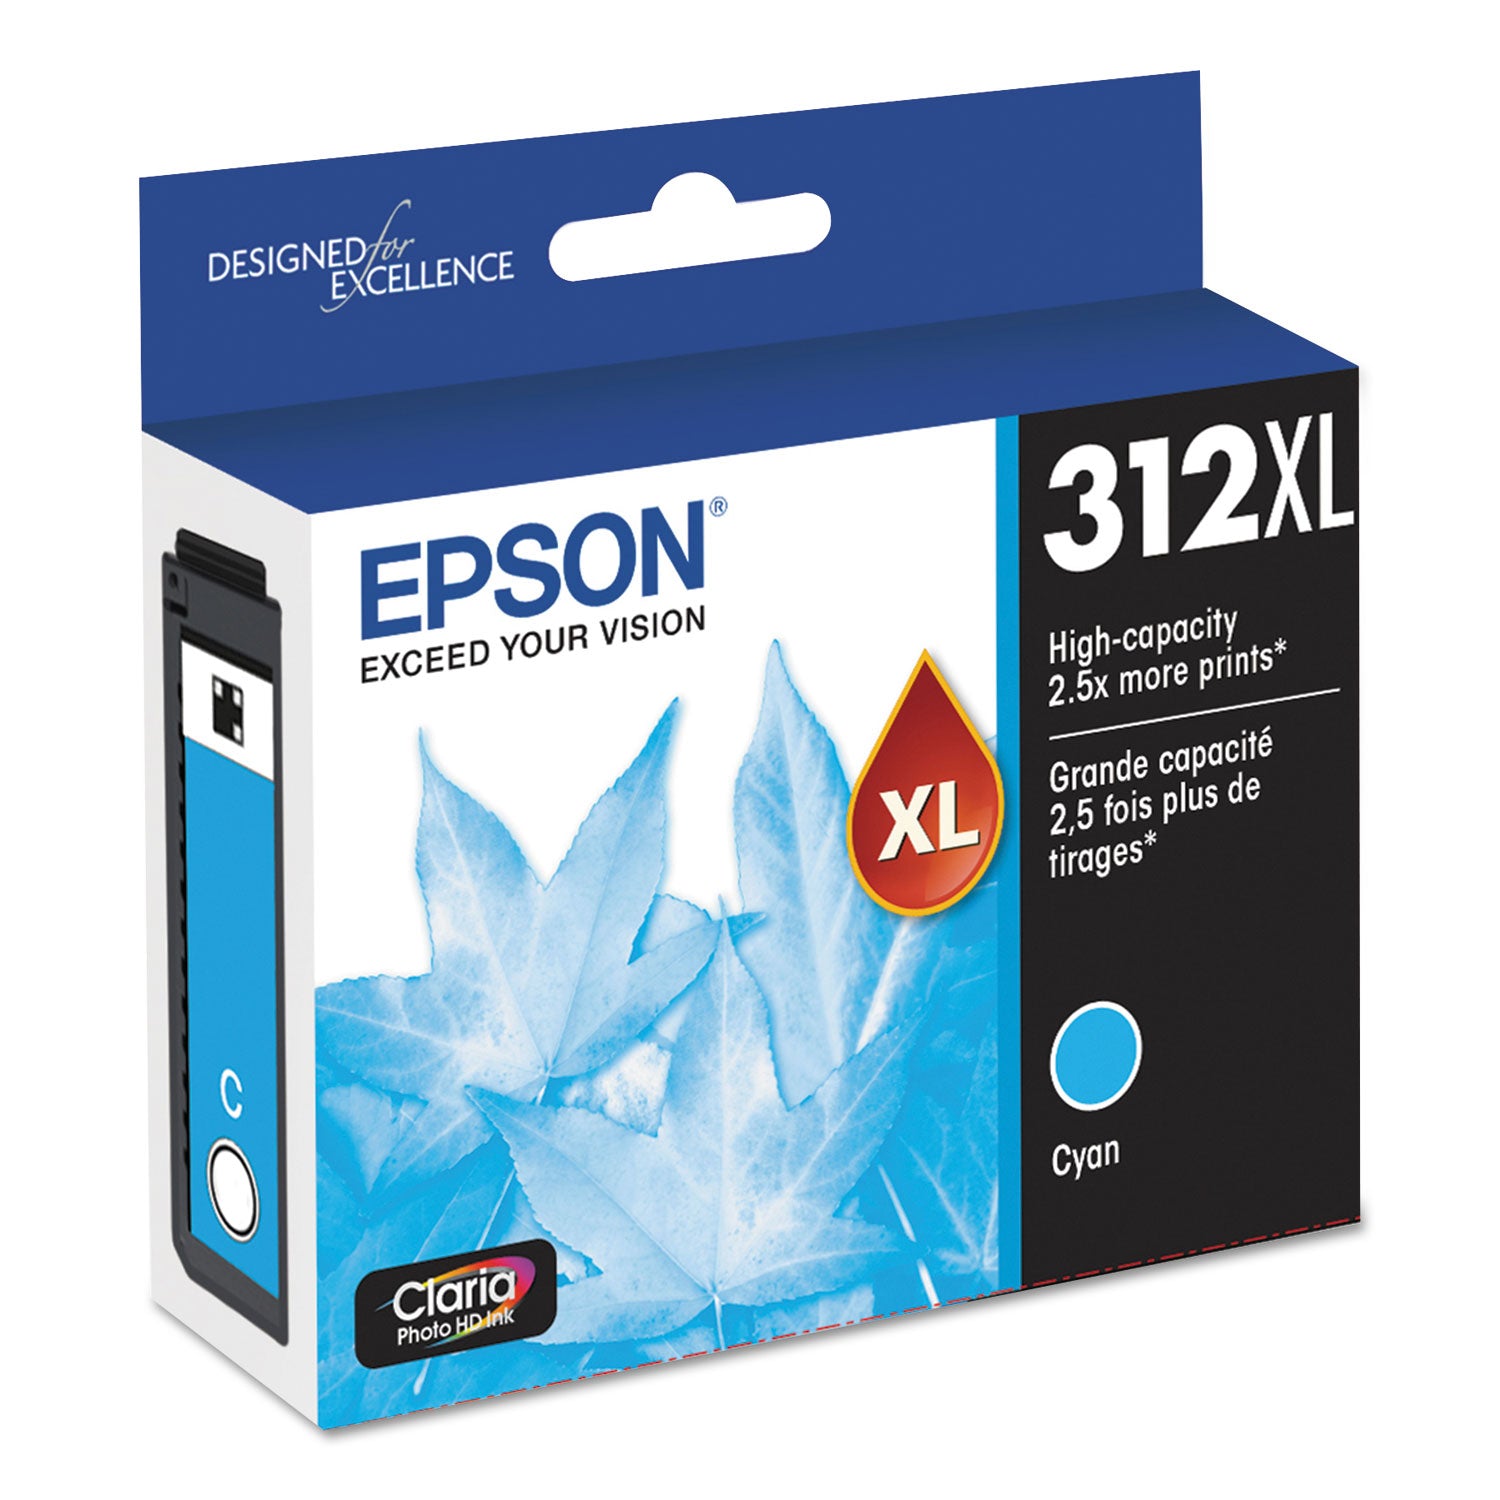 t312xl220-s-312xl-claria-high-yield-ink-830-page-yield-cyan_epst312xl220s - 2